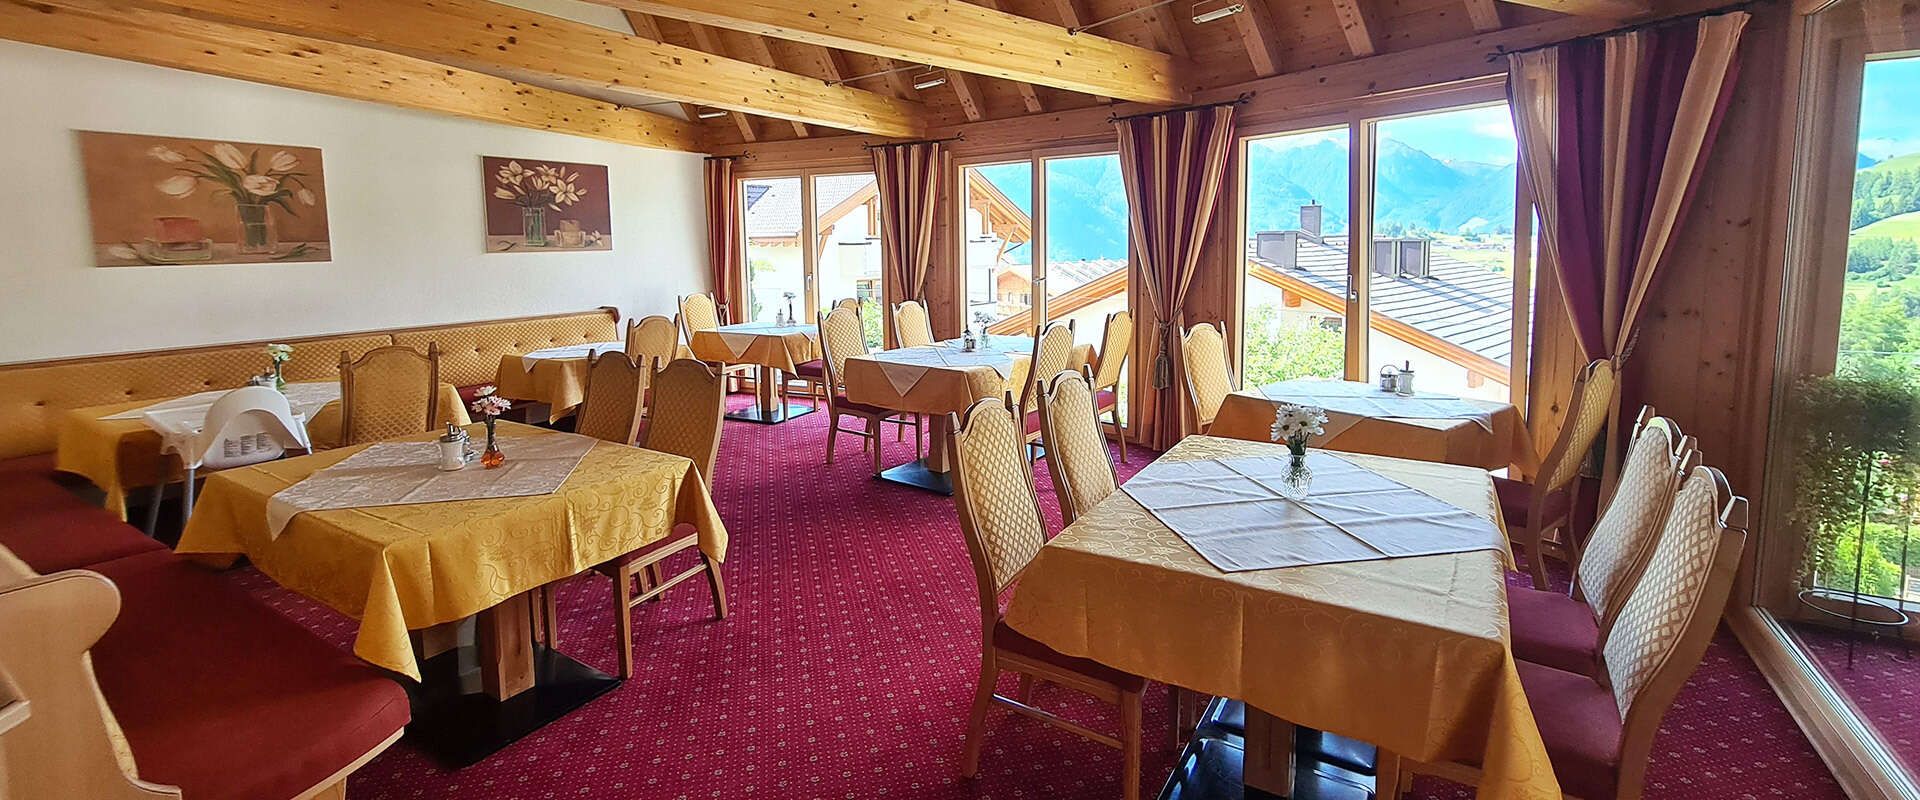 Breakfast room in the Hotel Sonnenheim with a view of the Fisser mountains